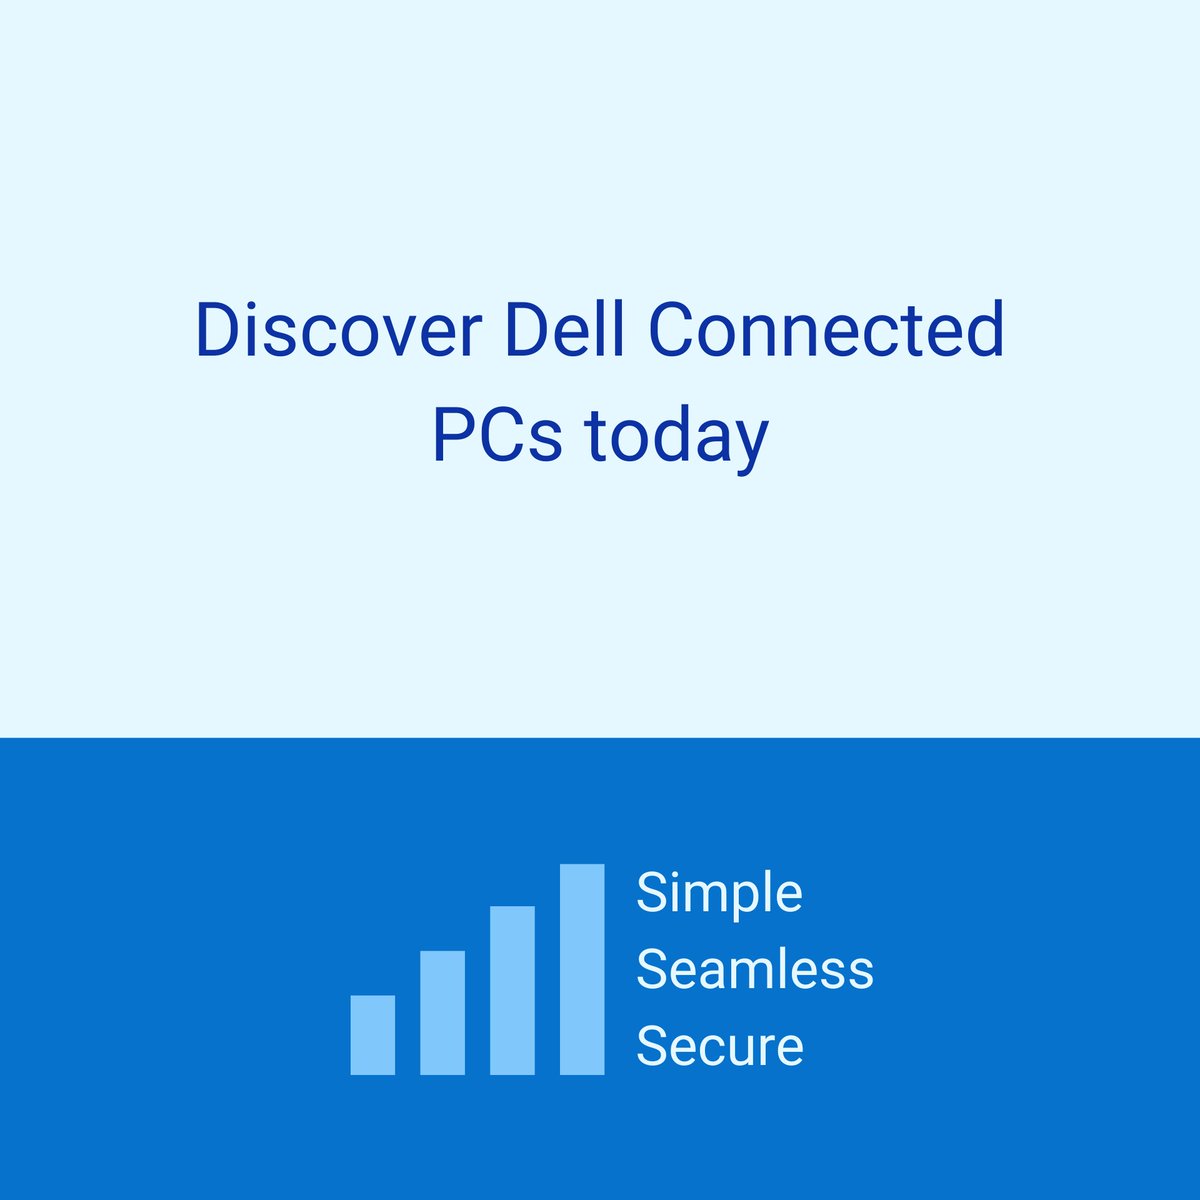 Dell is partnering with AT&T to help keep your data secure and employees productive with Connected PC!

Learn more about Connected PCs here: dell.to/3QwSRqZ

#connectivity #connectedpc #iwork4dell
 #iwork4dell